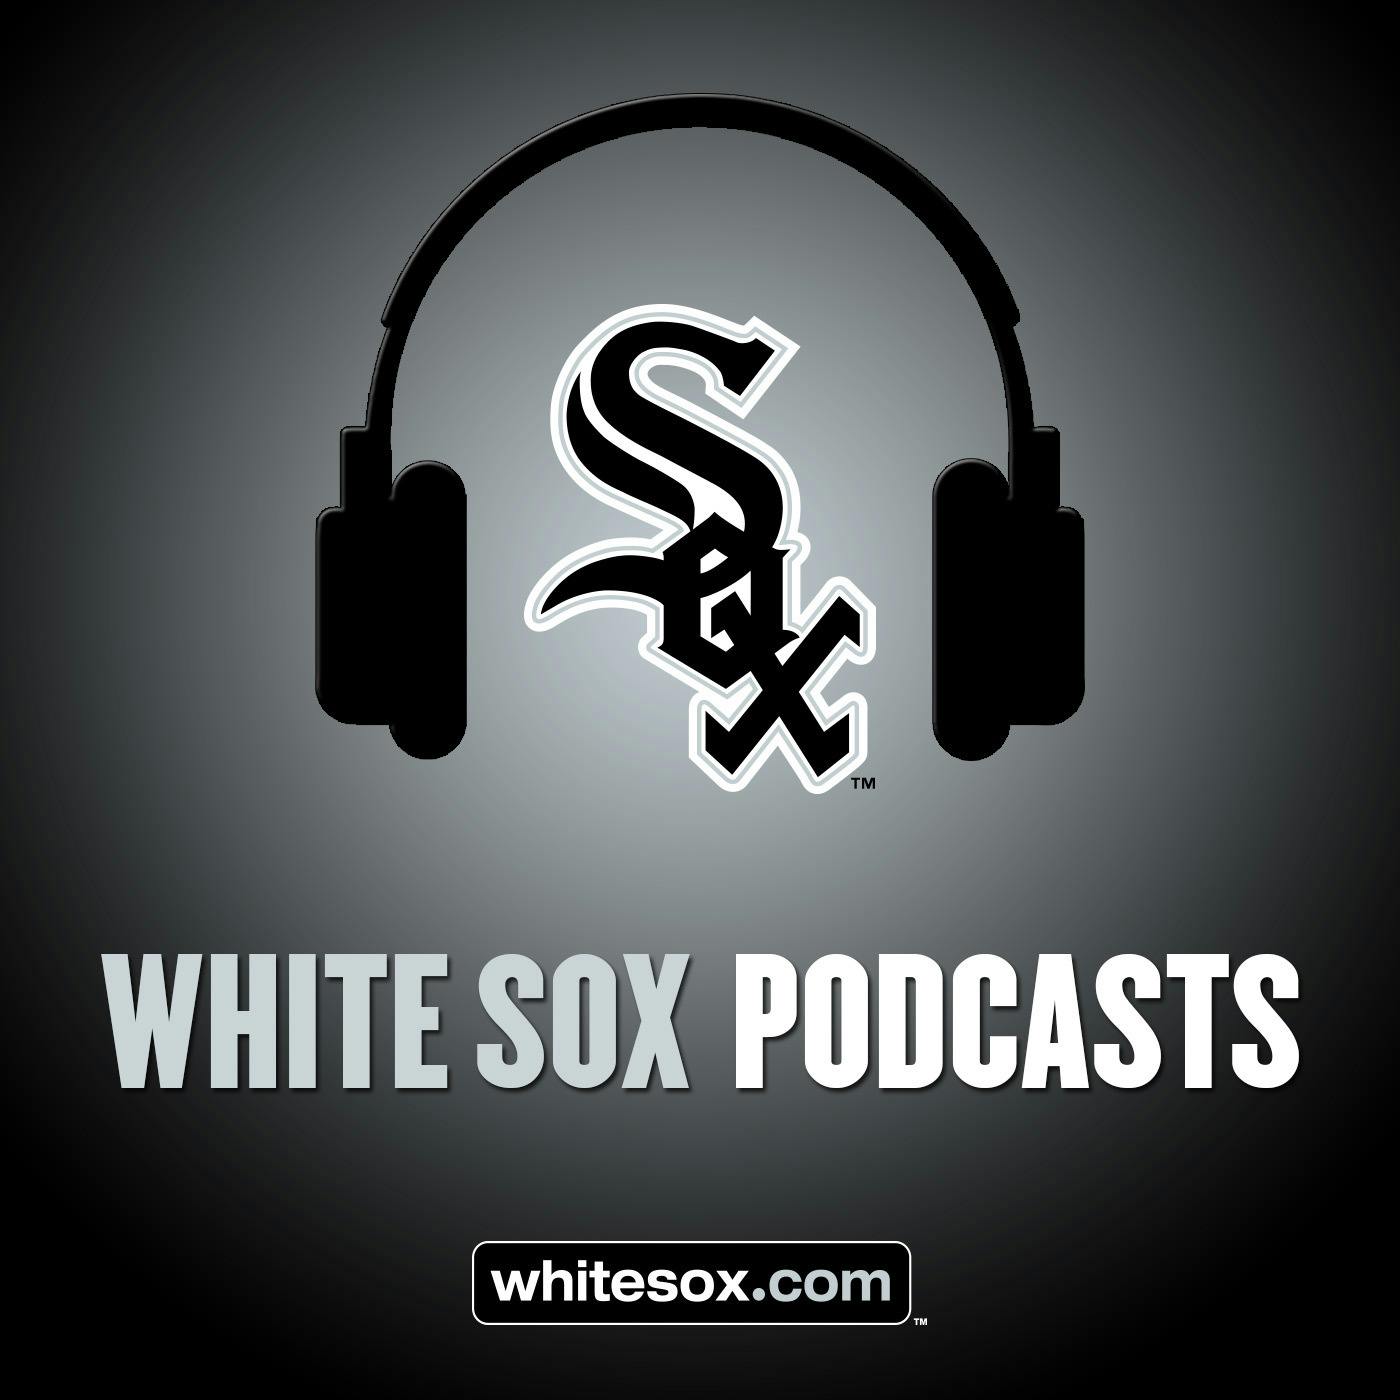 2/9/19: White Sox Weekly